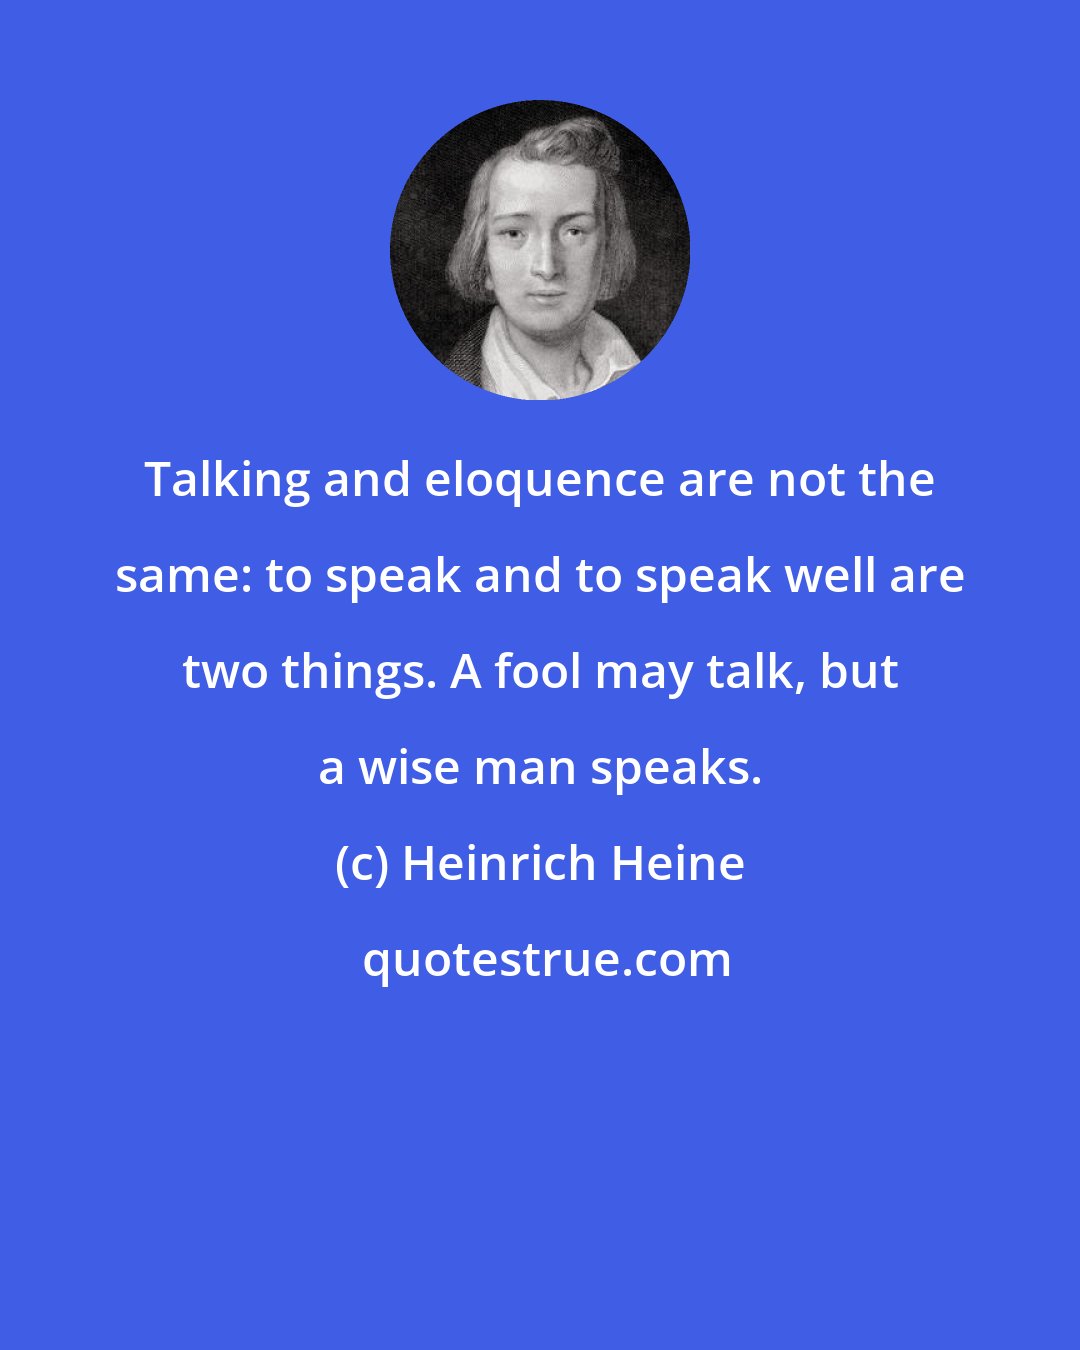 Heinrich Heine: Talking and eloquence are not the same: to speak and to speak well are two things. A fool may talk, but a wise man speaks.